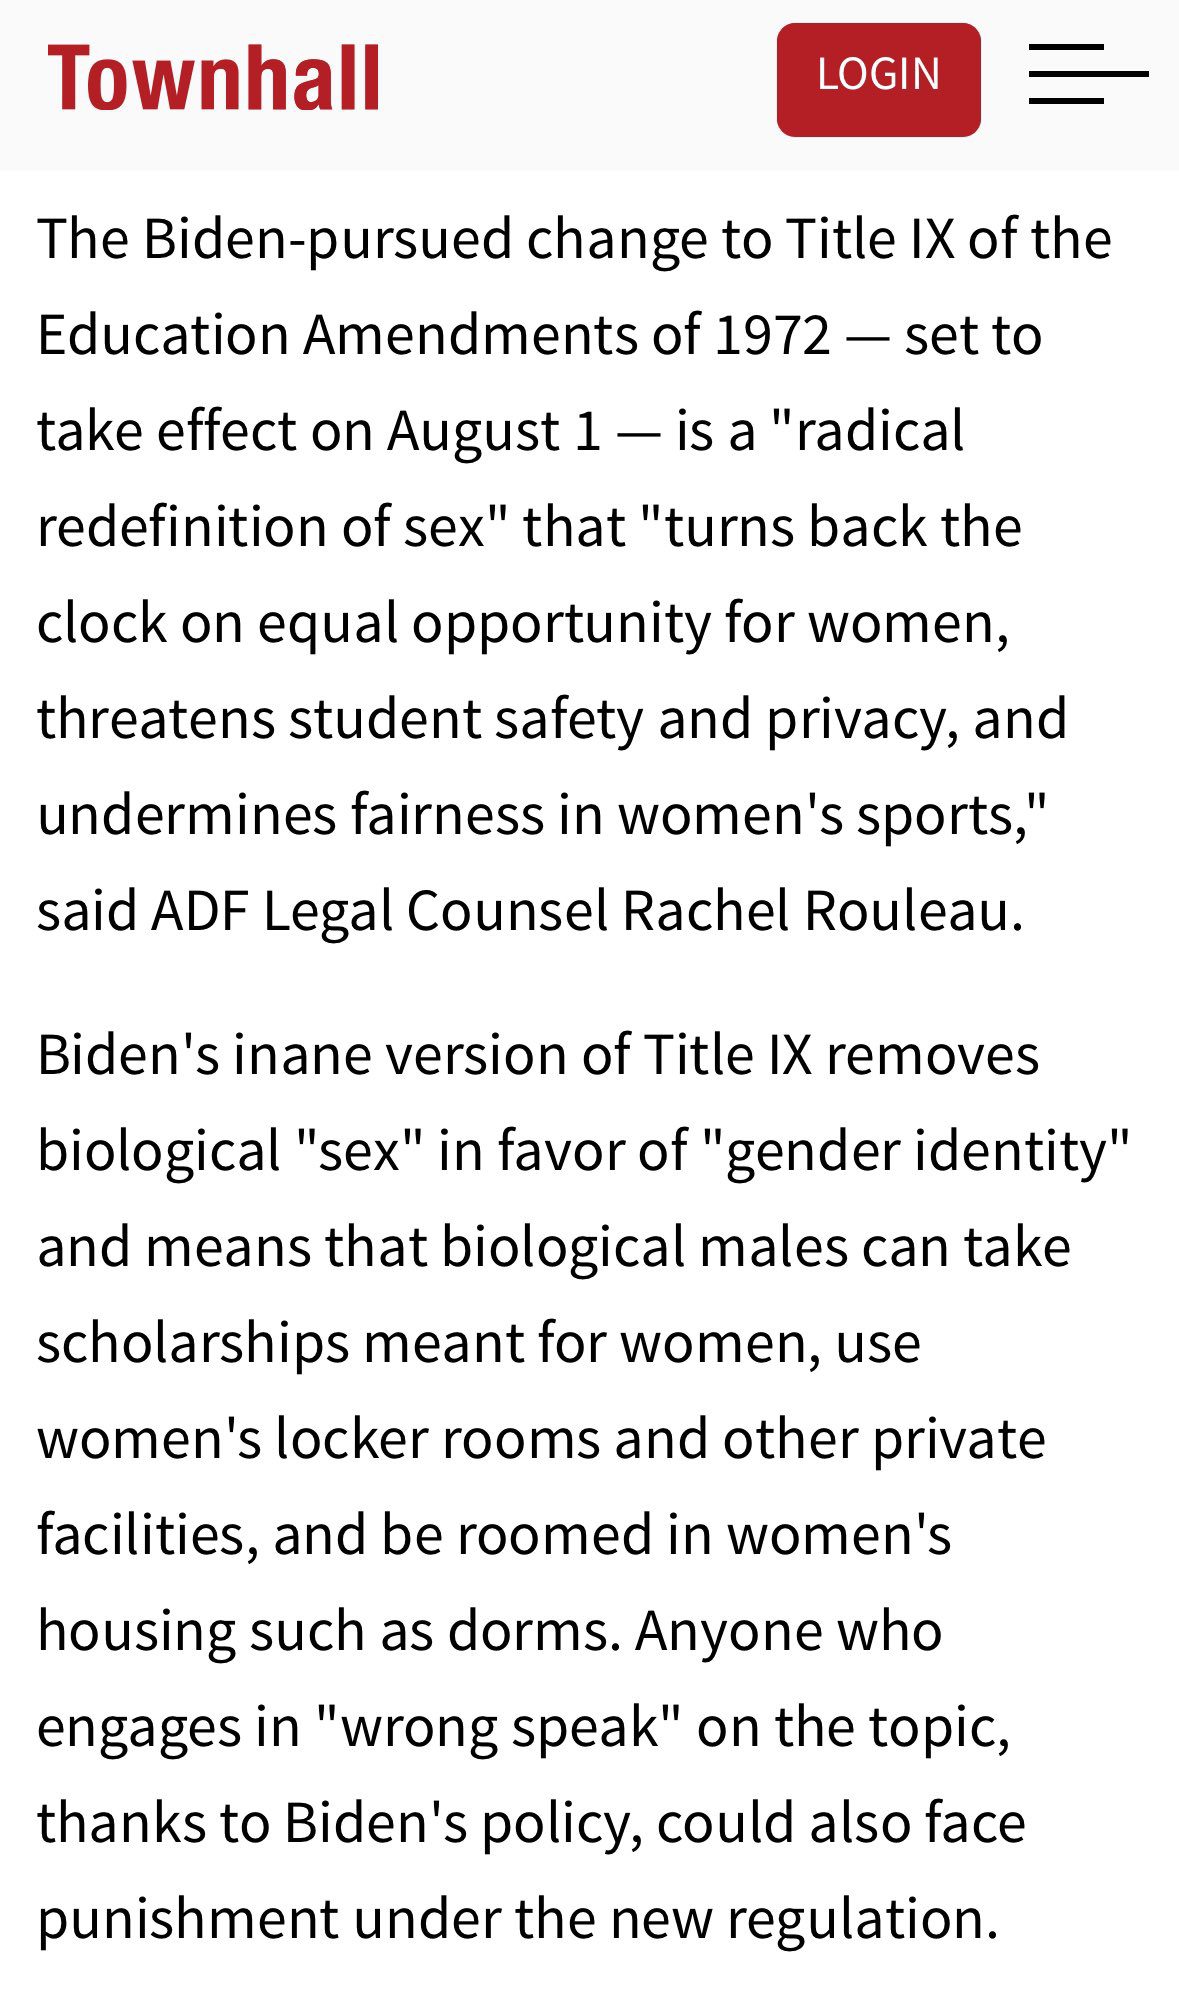 Biden Regime Removes Title IX Protections For Women in Sports and Gives It To Men in Women’s Sports